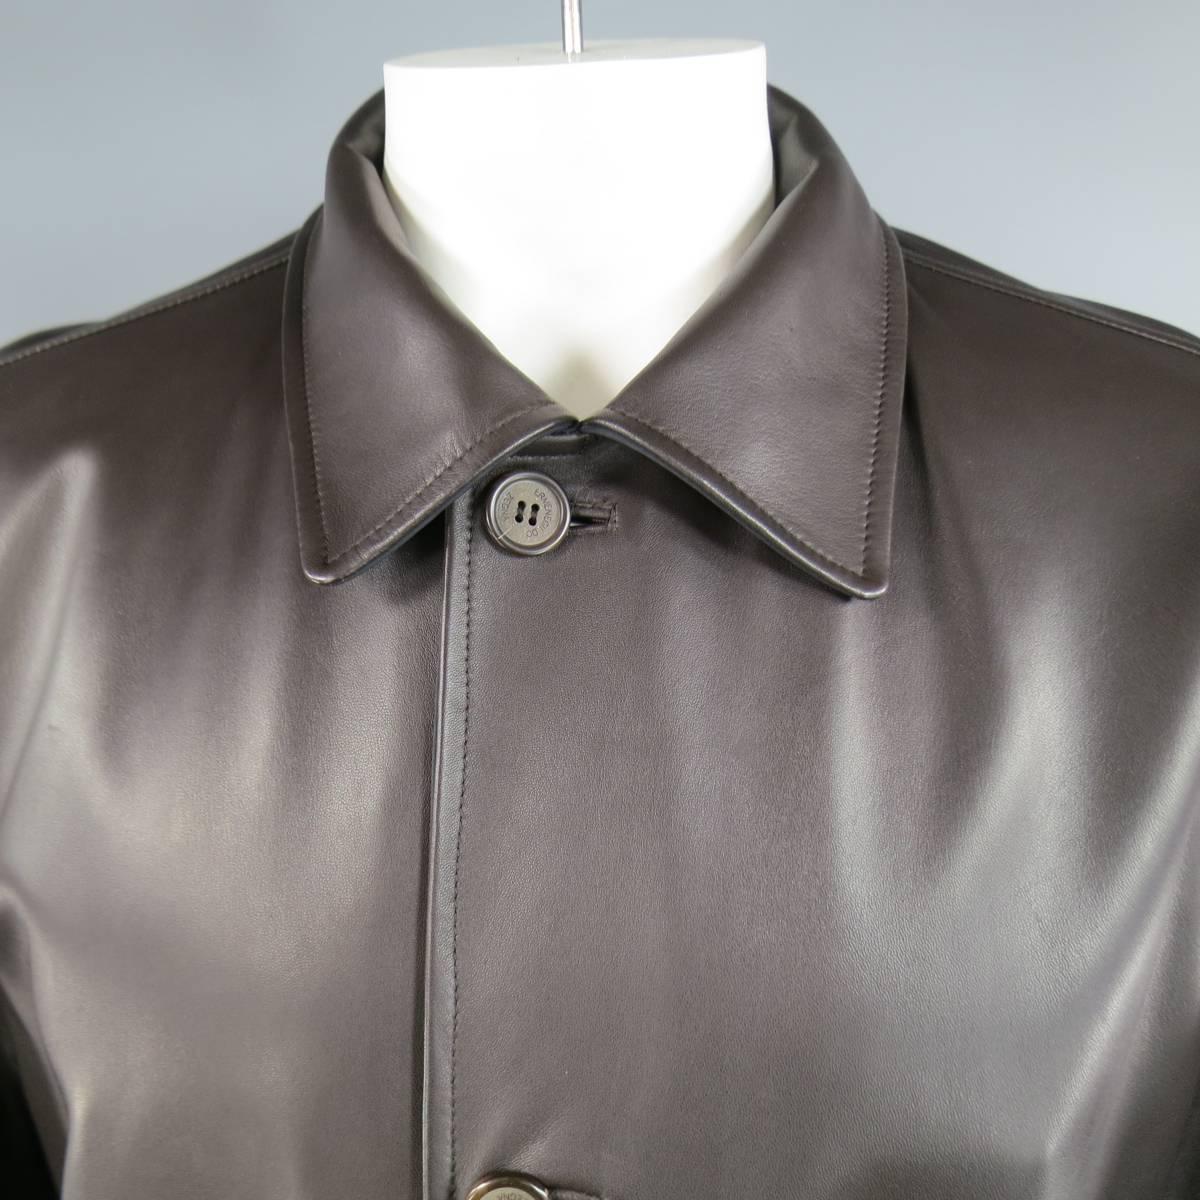 Classic winter coat by ERMENEGILDO ZEGNA in a rich brown leather featuring a pointed collar, button up closure, patch pockets, and reversible black windbreaker lining. Minor wear on leather and missing top button on nylon side. Made in Italy.
